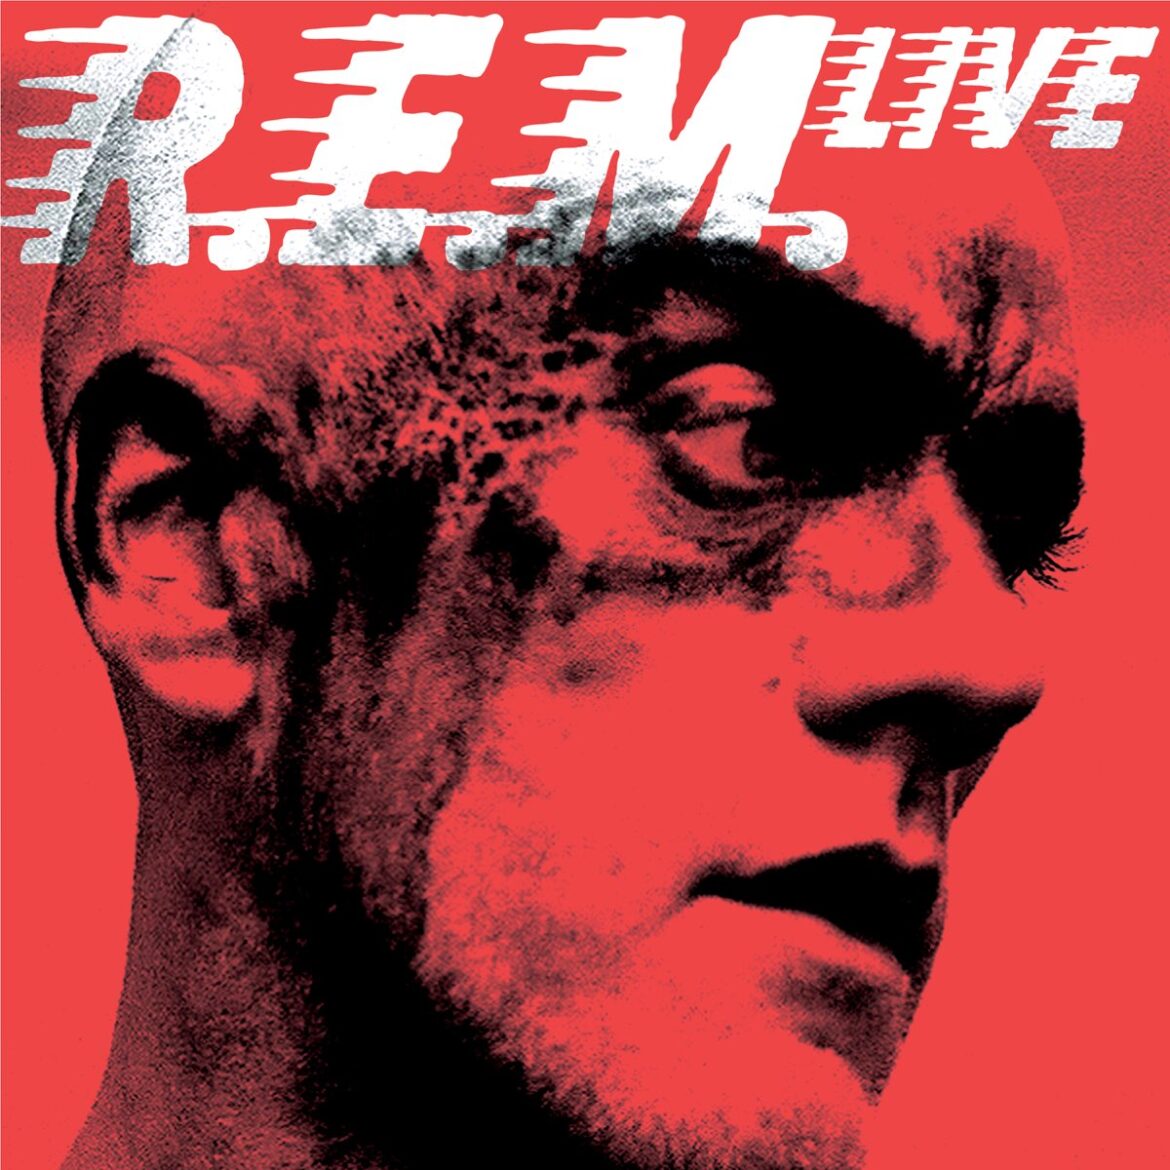 rem-released-“rem.-live”-15-years-ago-today